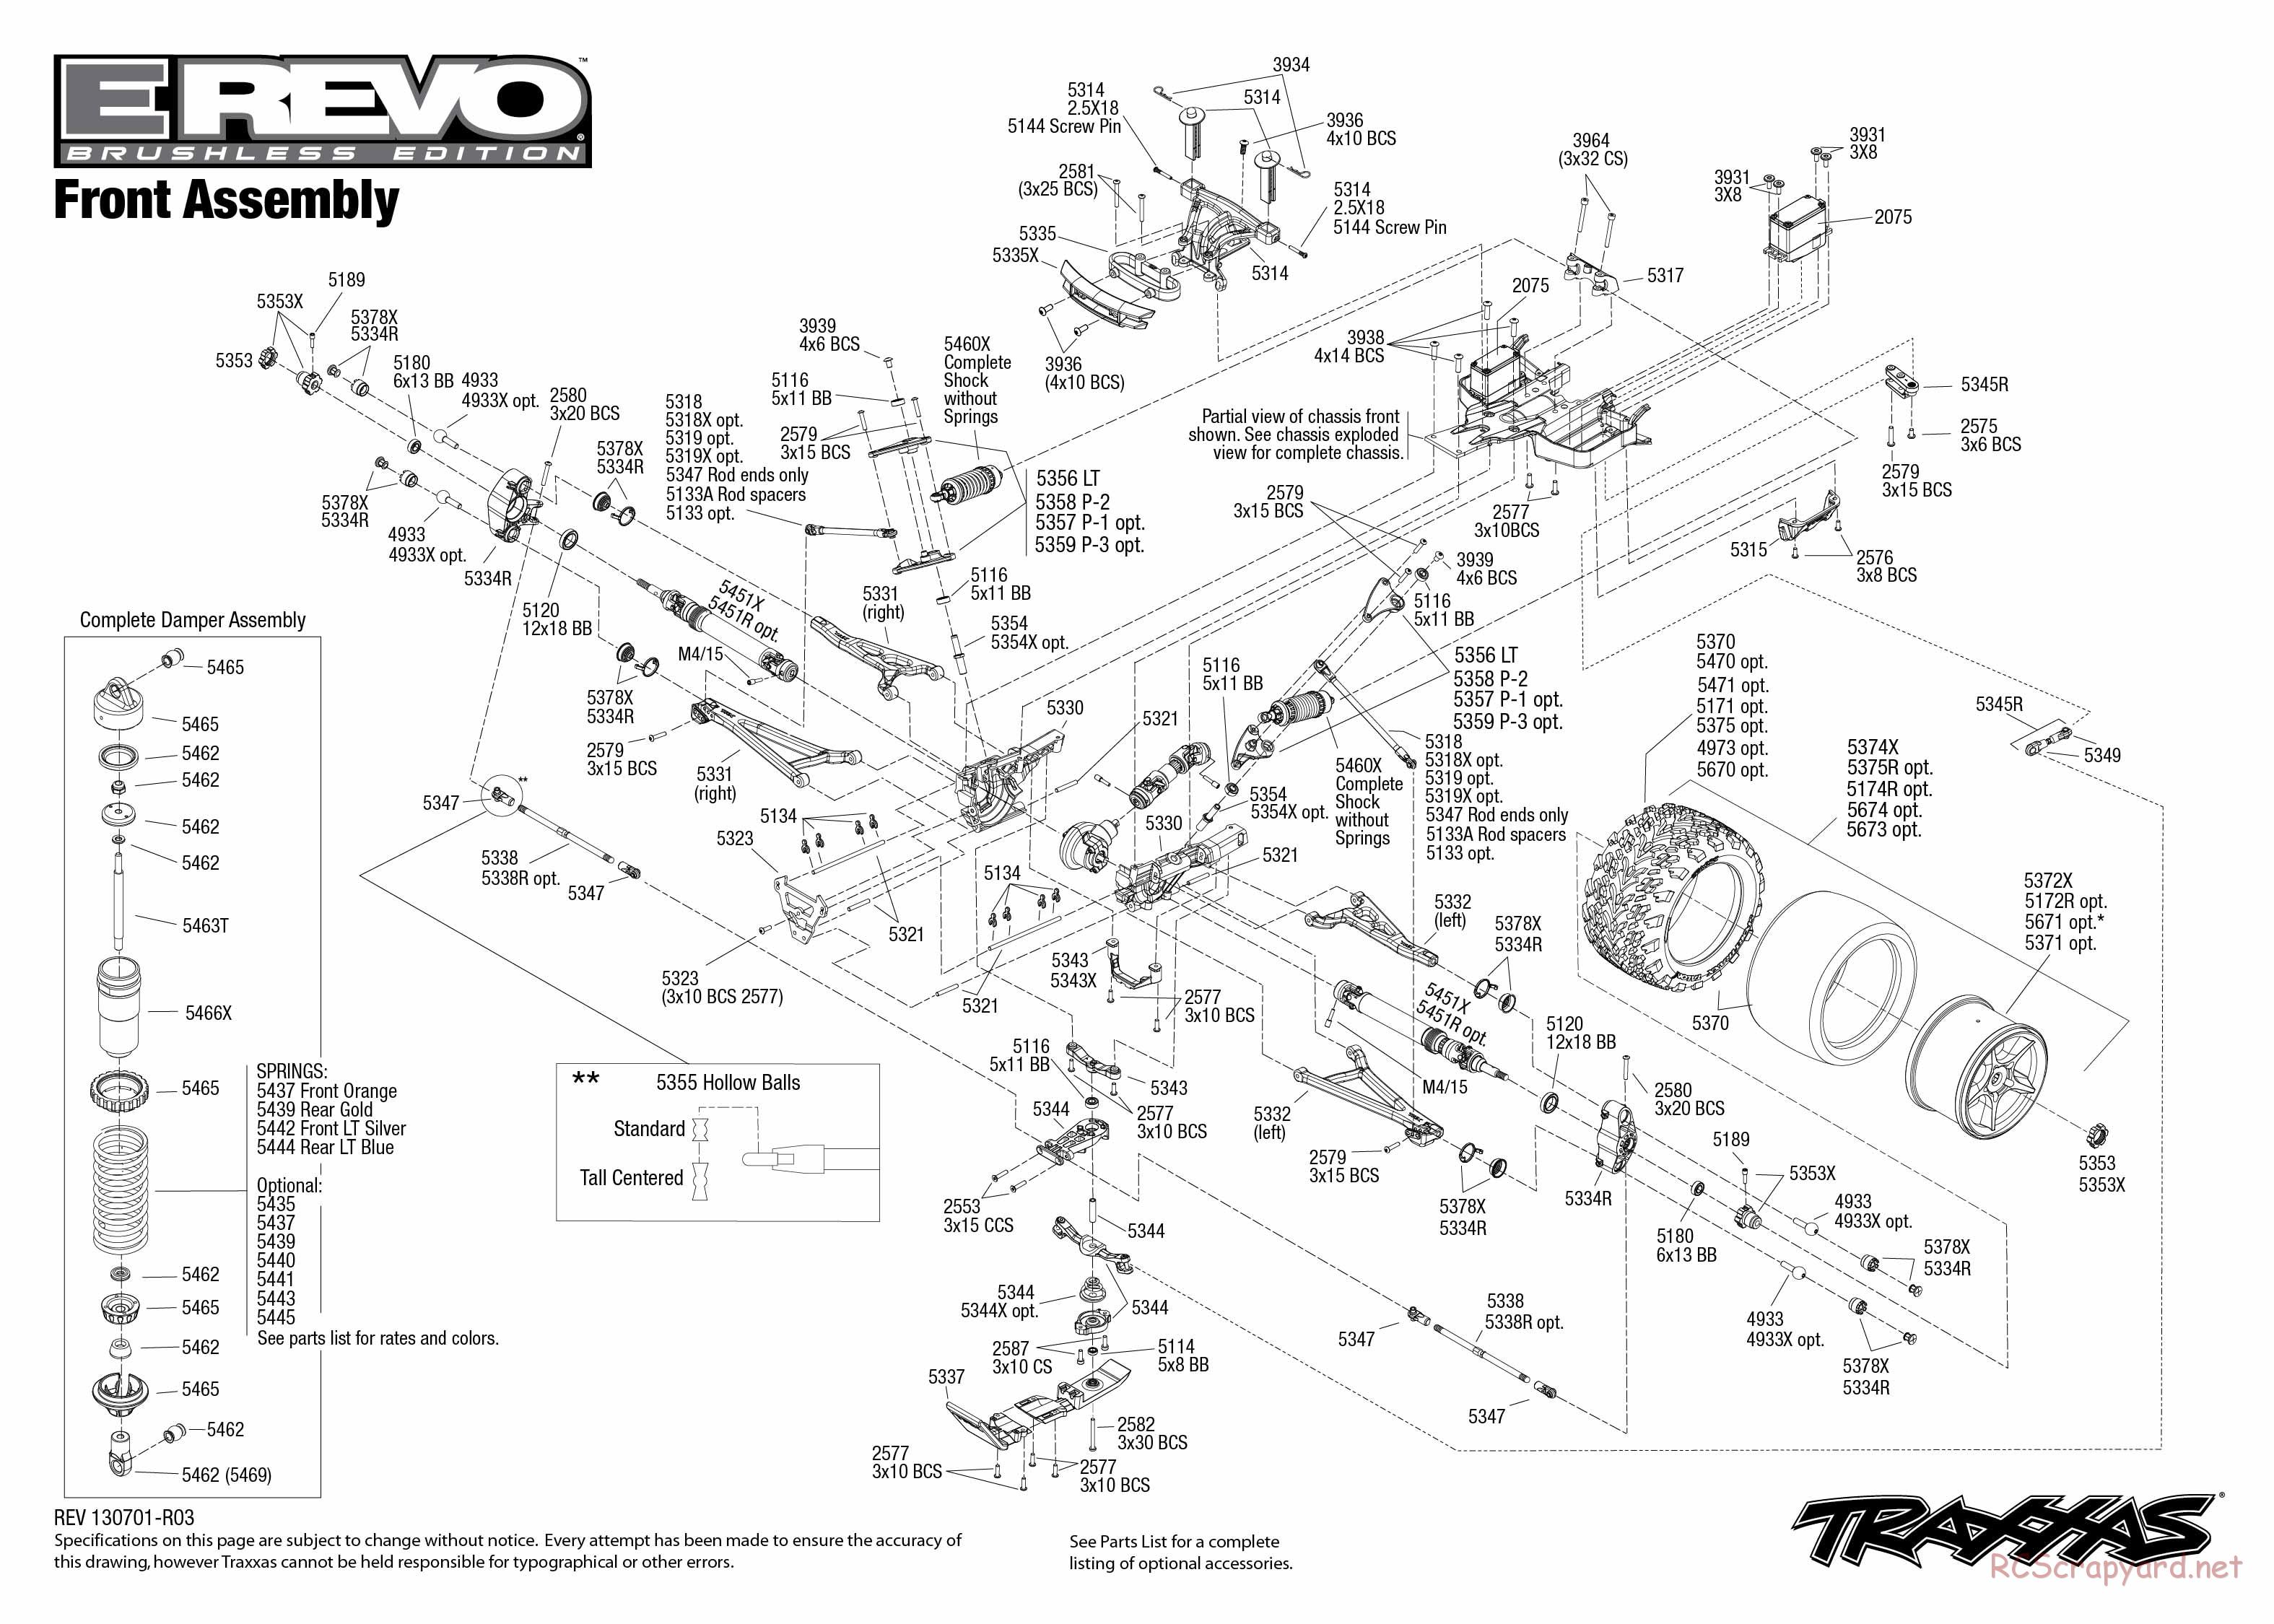 Traxxas - E-Revo Brushless (2012) - Exploded Views - Page 1